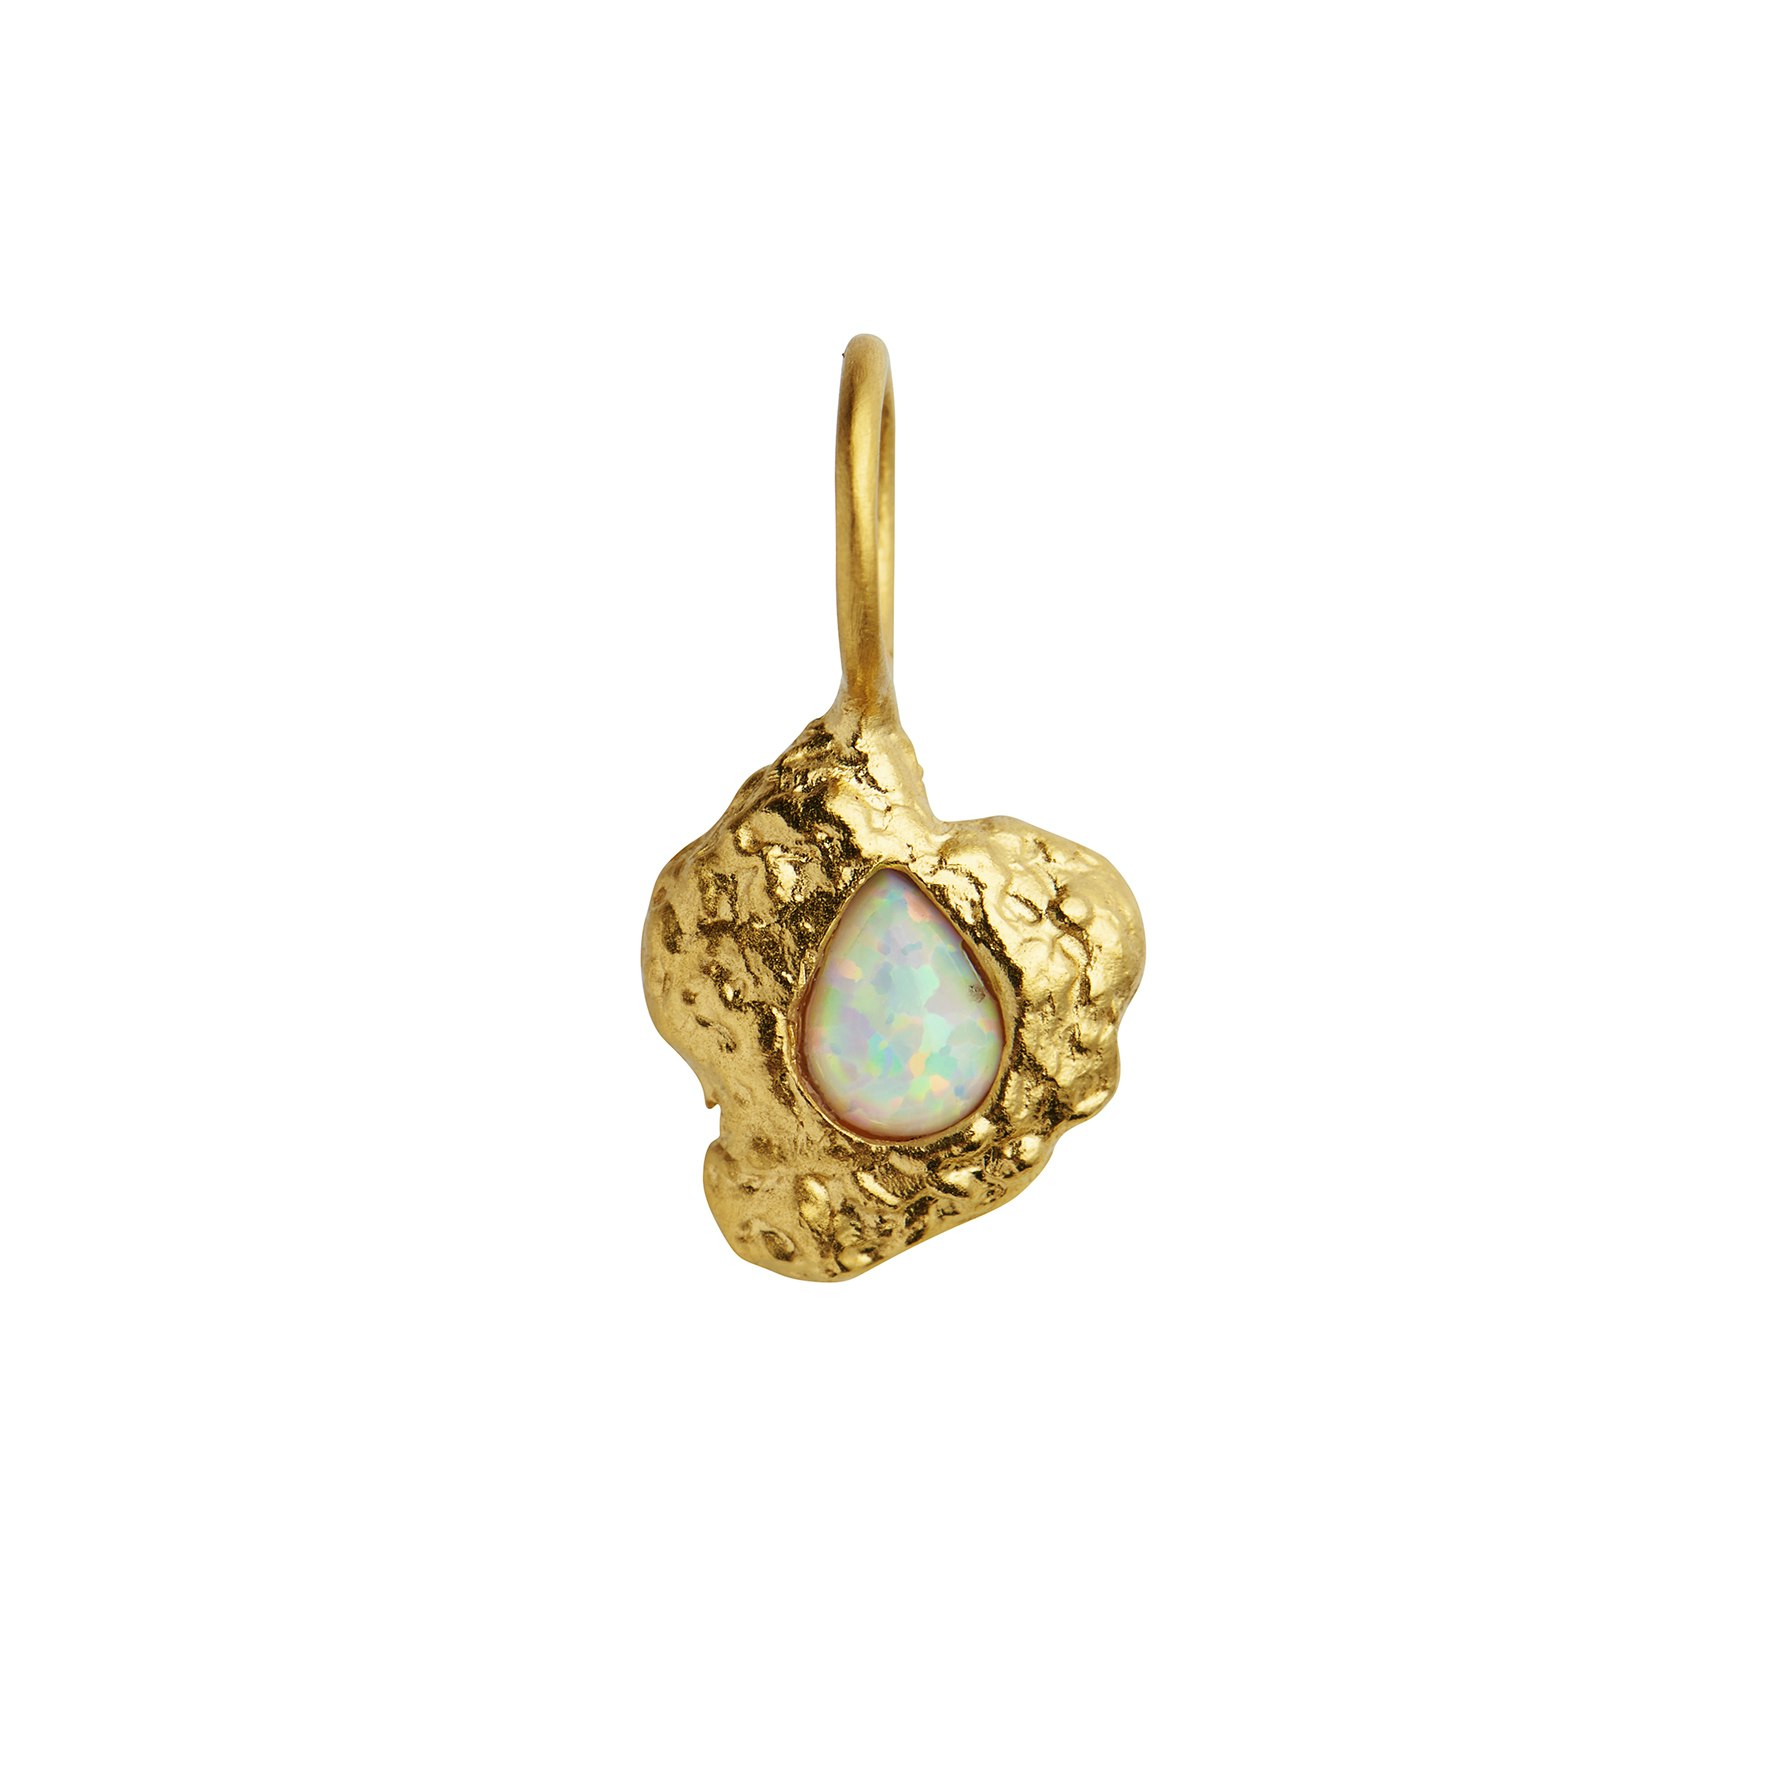 Ocean Glimpse Pendant With Opal von STINE A Jewelry in Vergoldet-Silber Sterling 925